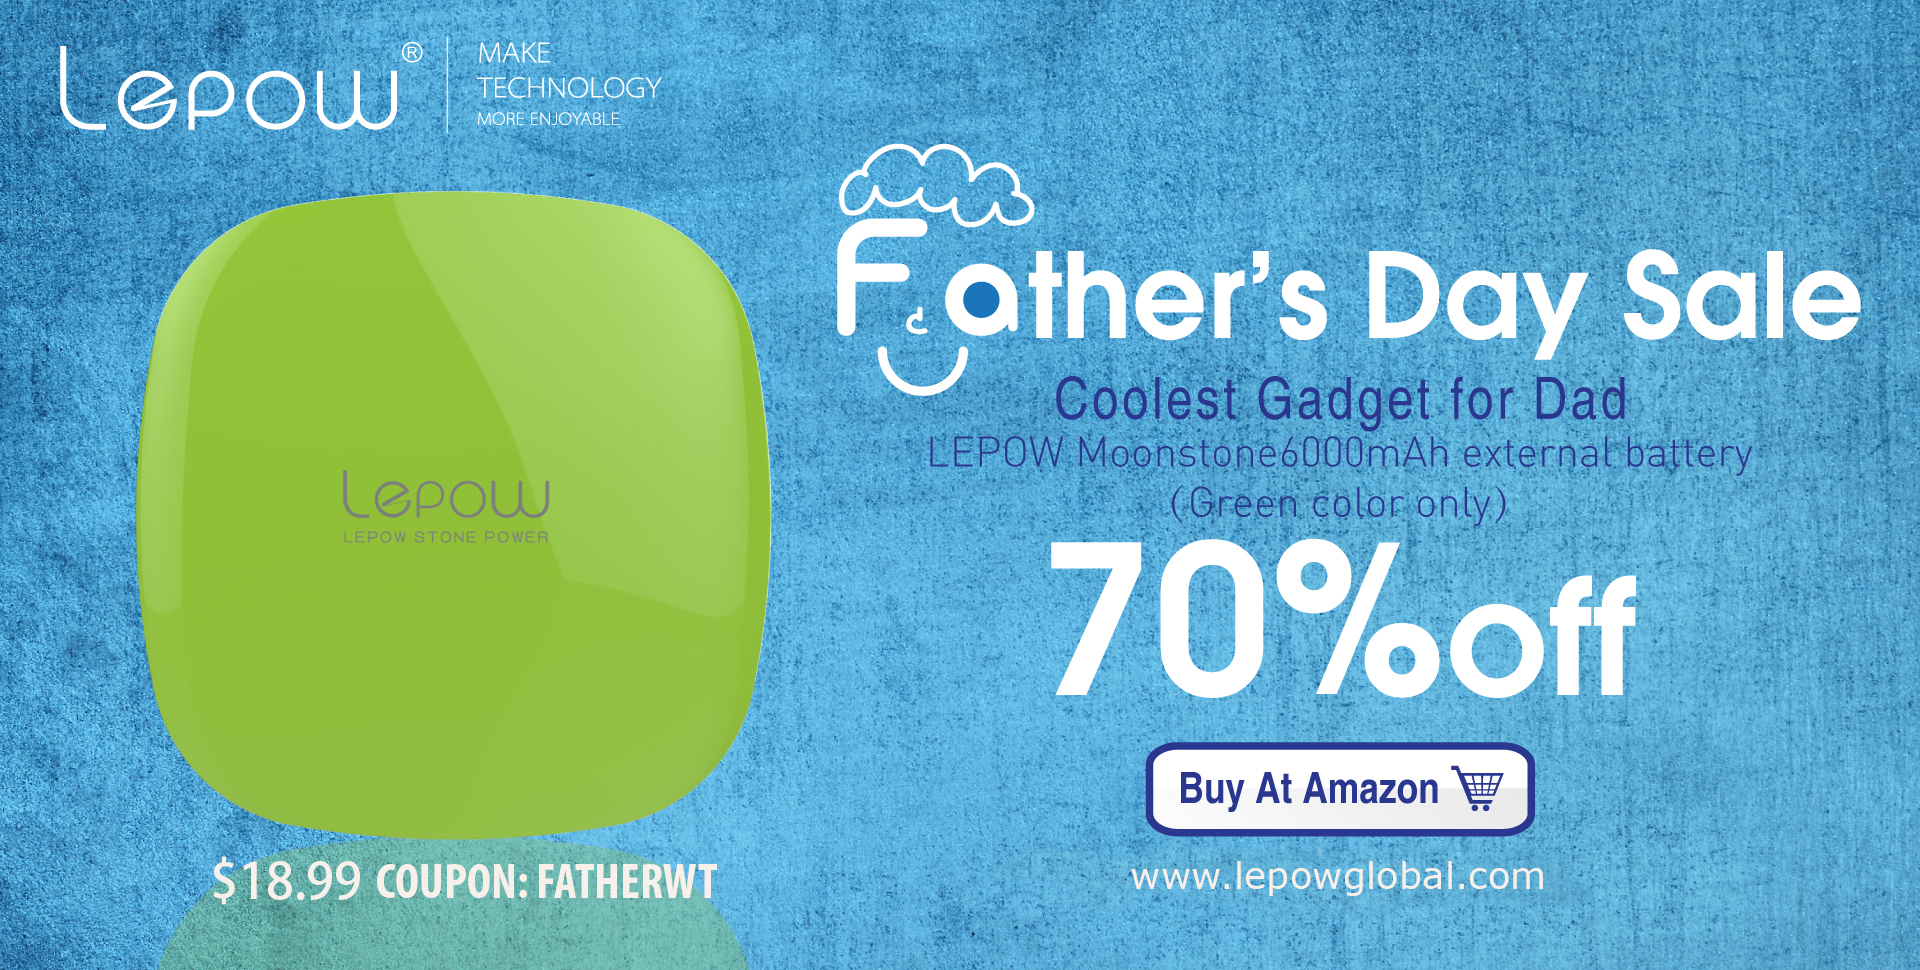 Father’s Day Sale Gadget 70% Off by @LEPOWOFFICIAL